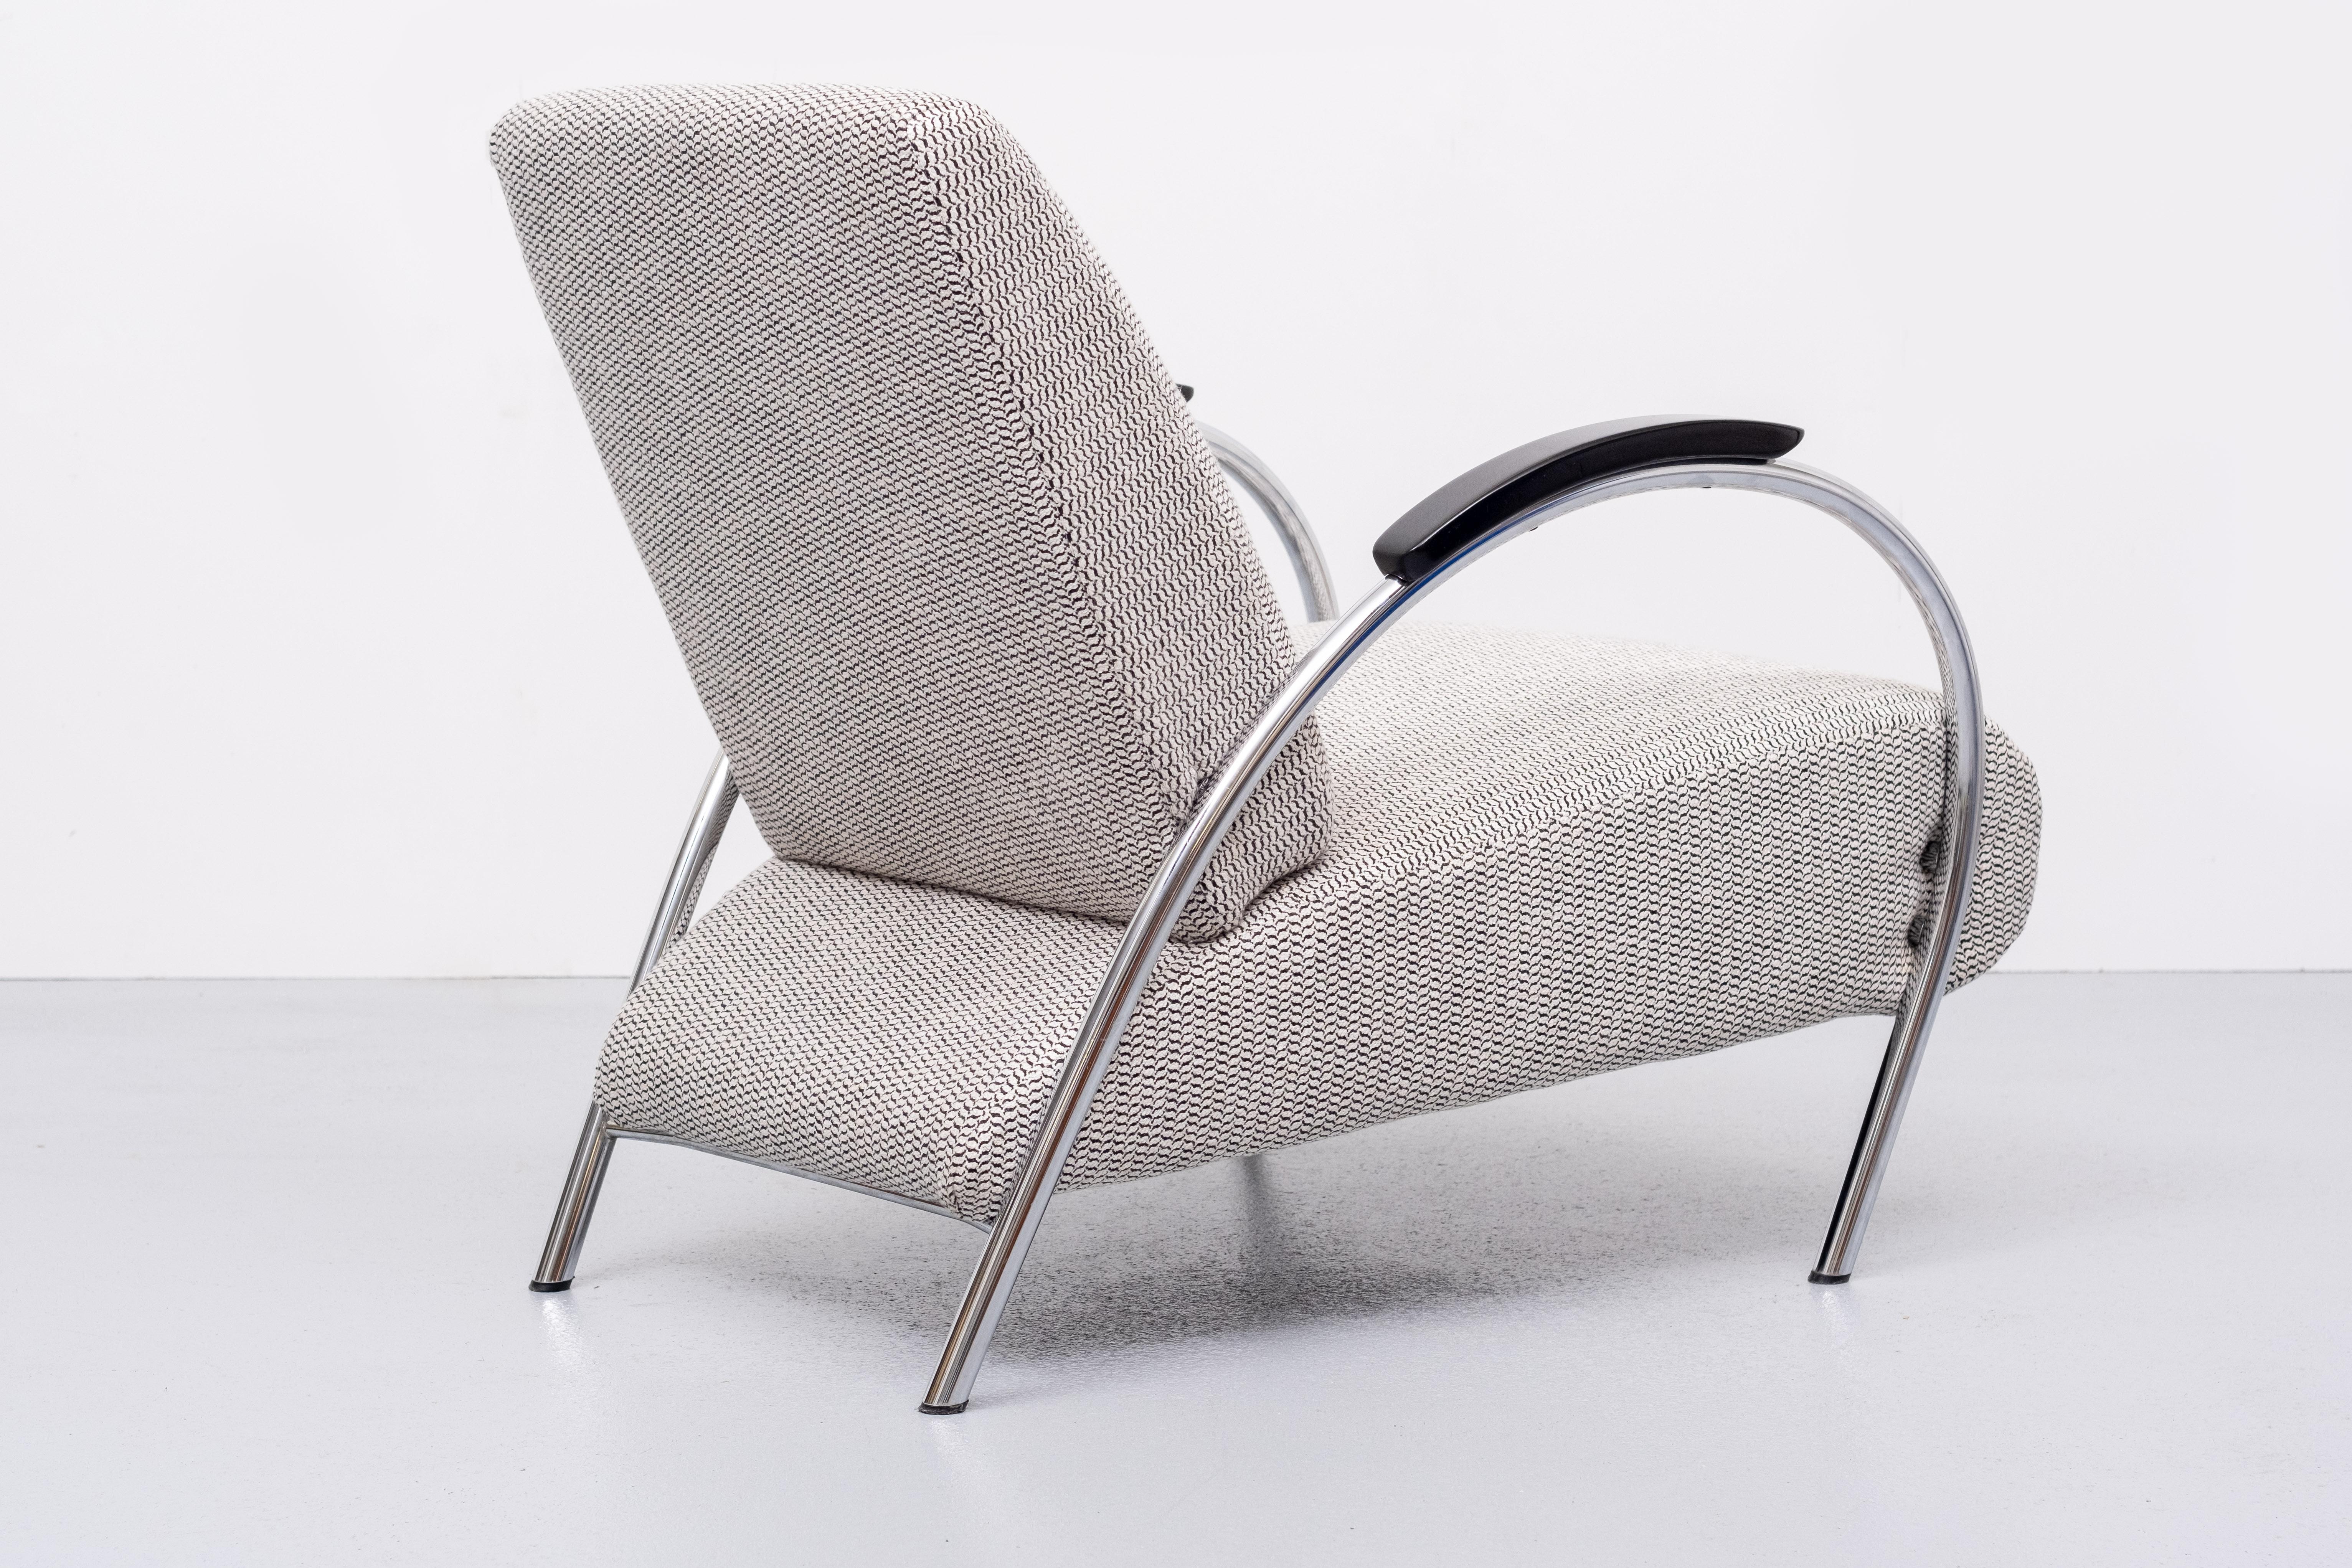 The famous model 5775 chair by Jan Des Bouvrie for Gelderland. Real Dutch classic with a tubular chrome frame and solid beech armrests. The characteristic lines of the rear of this chair were inspired by the designer's beloved Porsche 911. Very